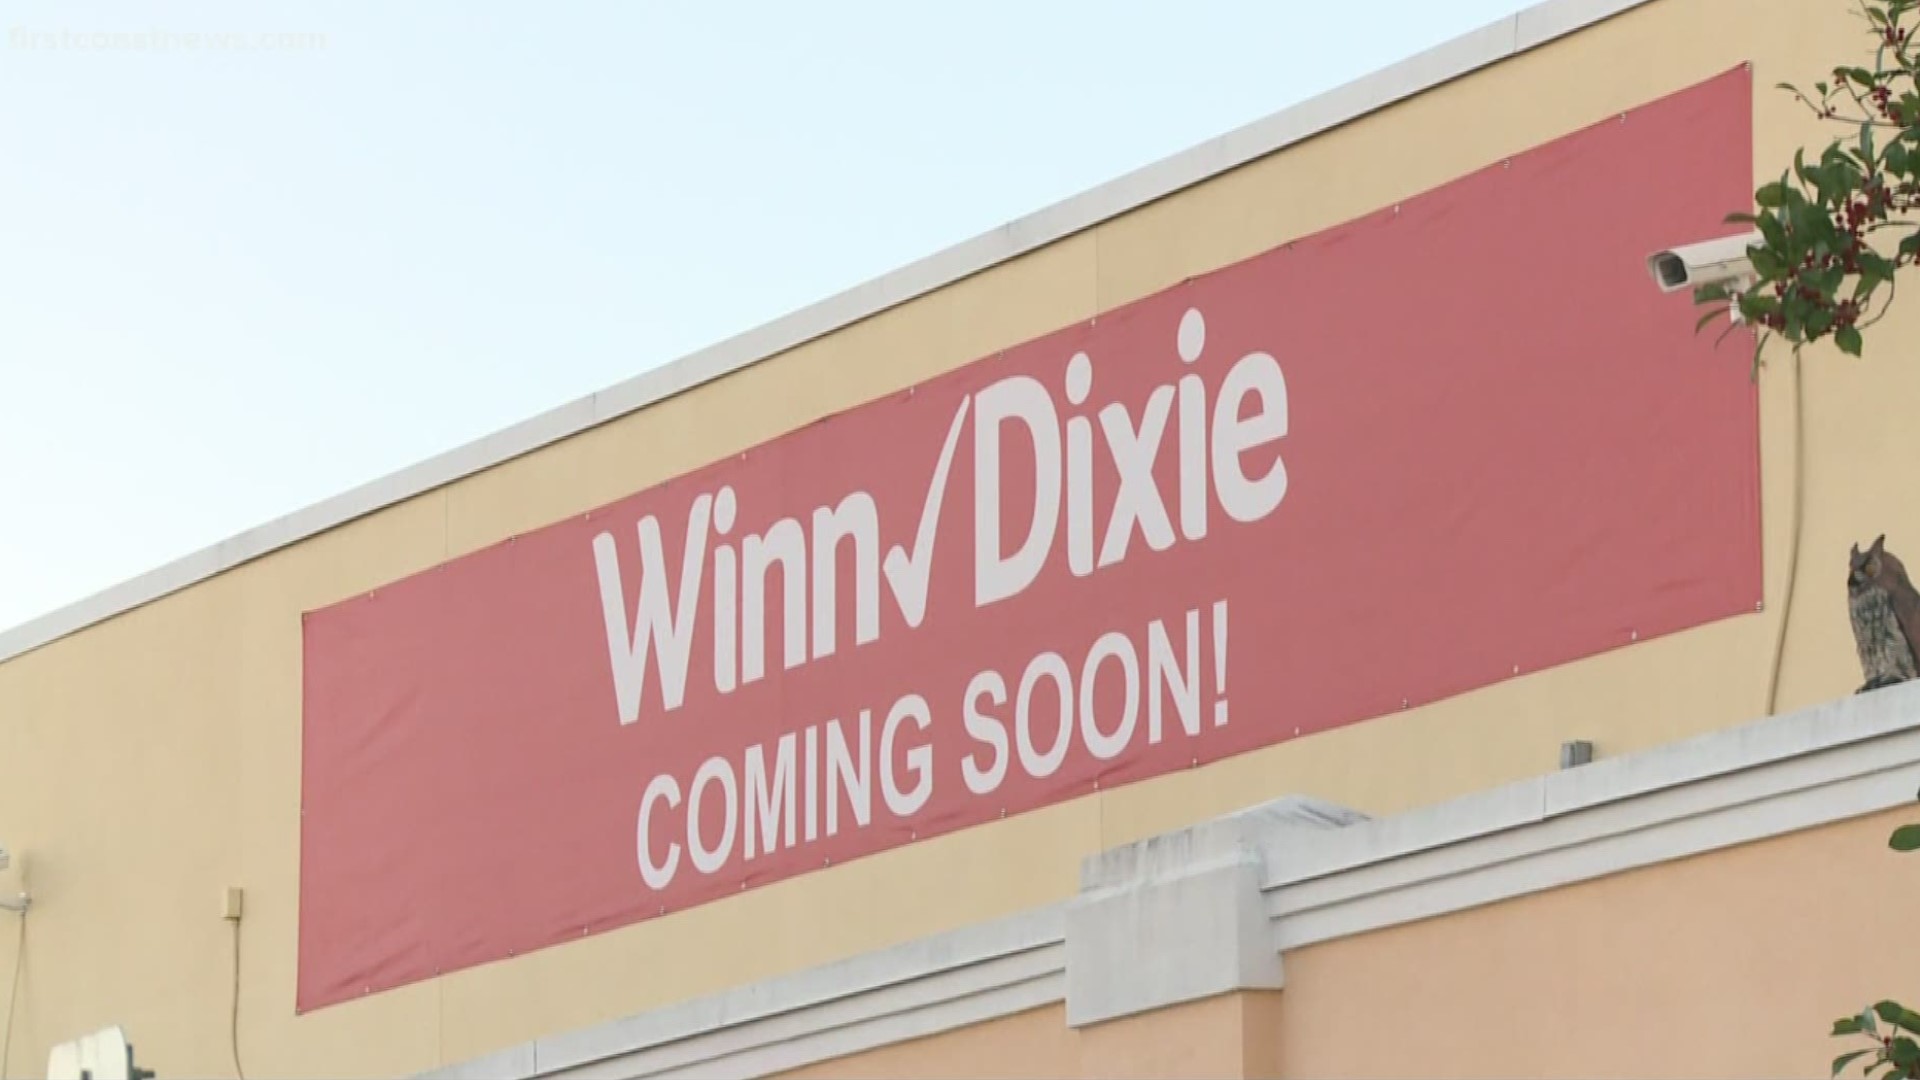 Renovation plans for the new Winn-Dixie, measuring 28,120-square-feet, are now underway with the goal of opening on Wednesday, Feb. 12.